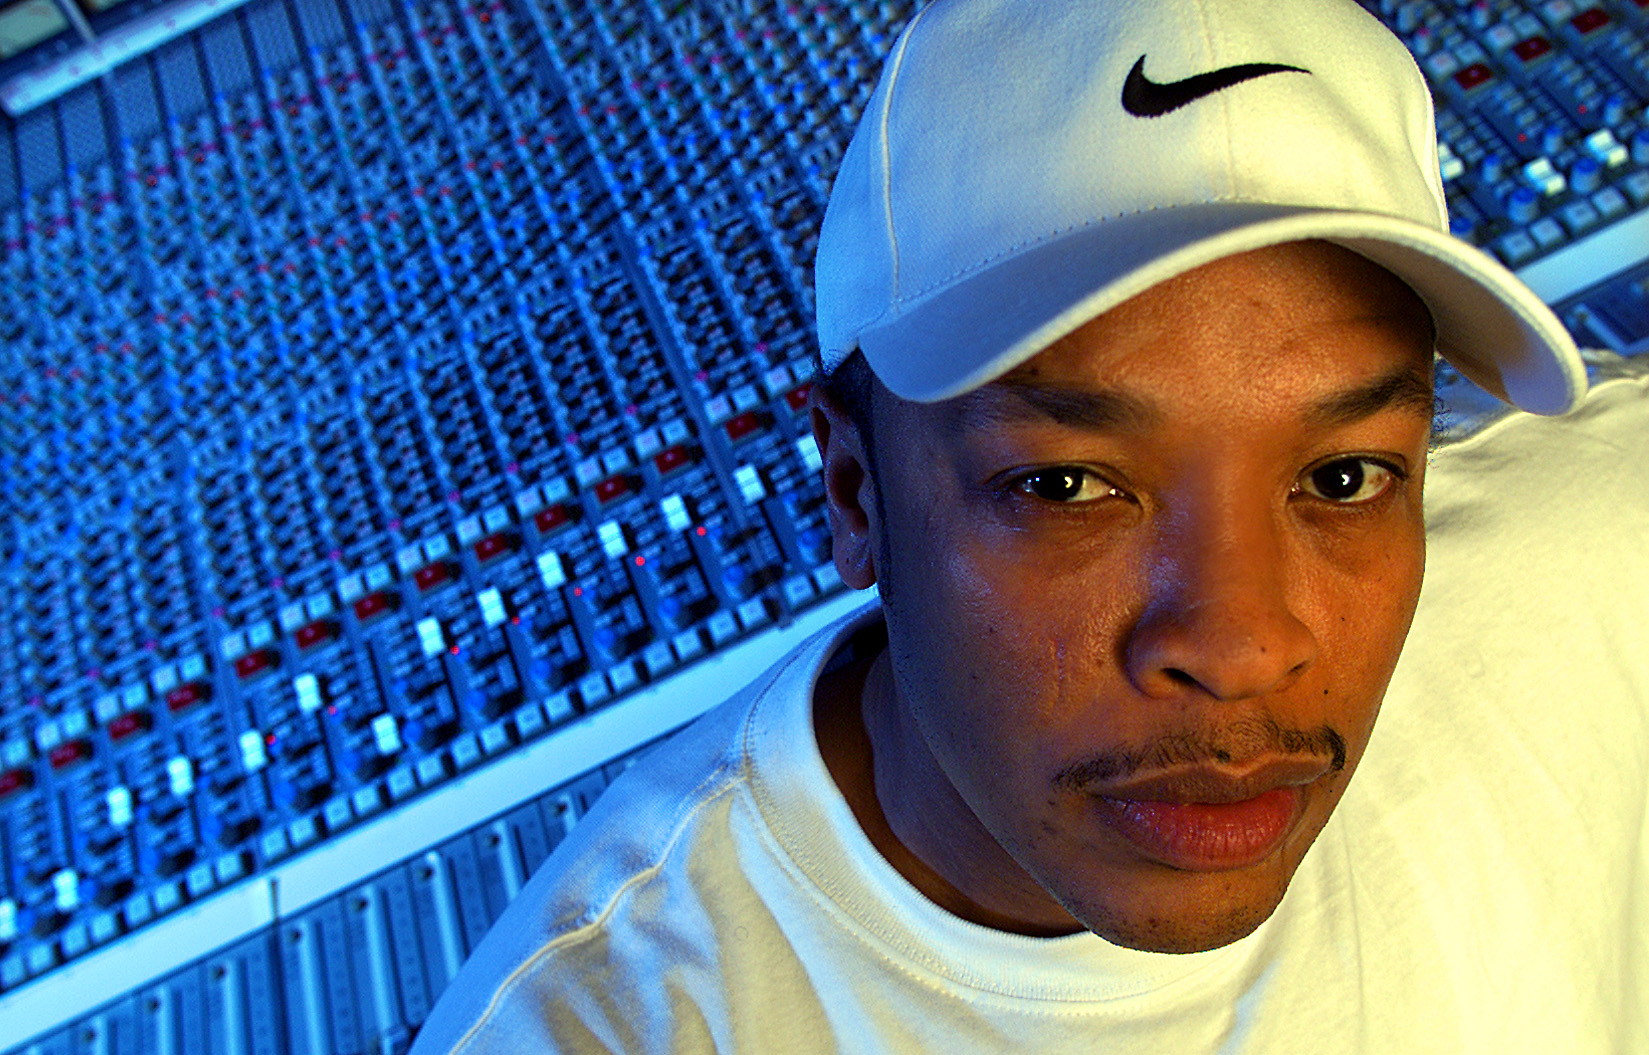 DR. DRE, rap producer, working on a new album inside his studio, Record One in Sherman Oaks, Feb. 12